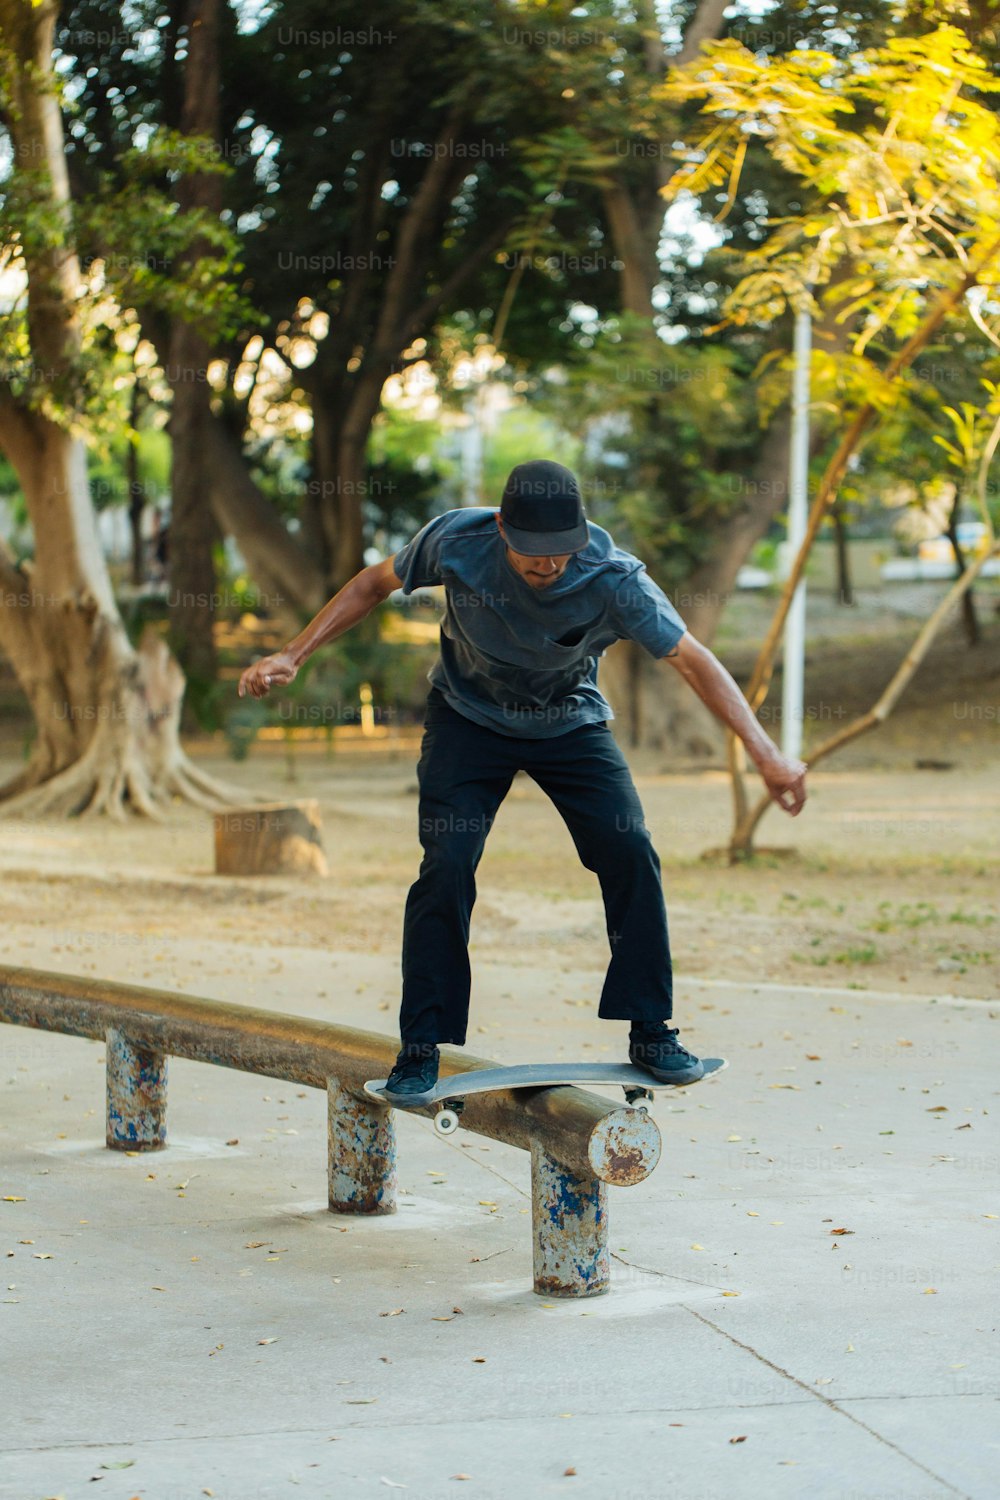 a man riding a skateboard on top of a wooden bench